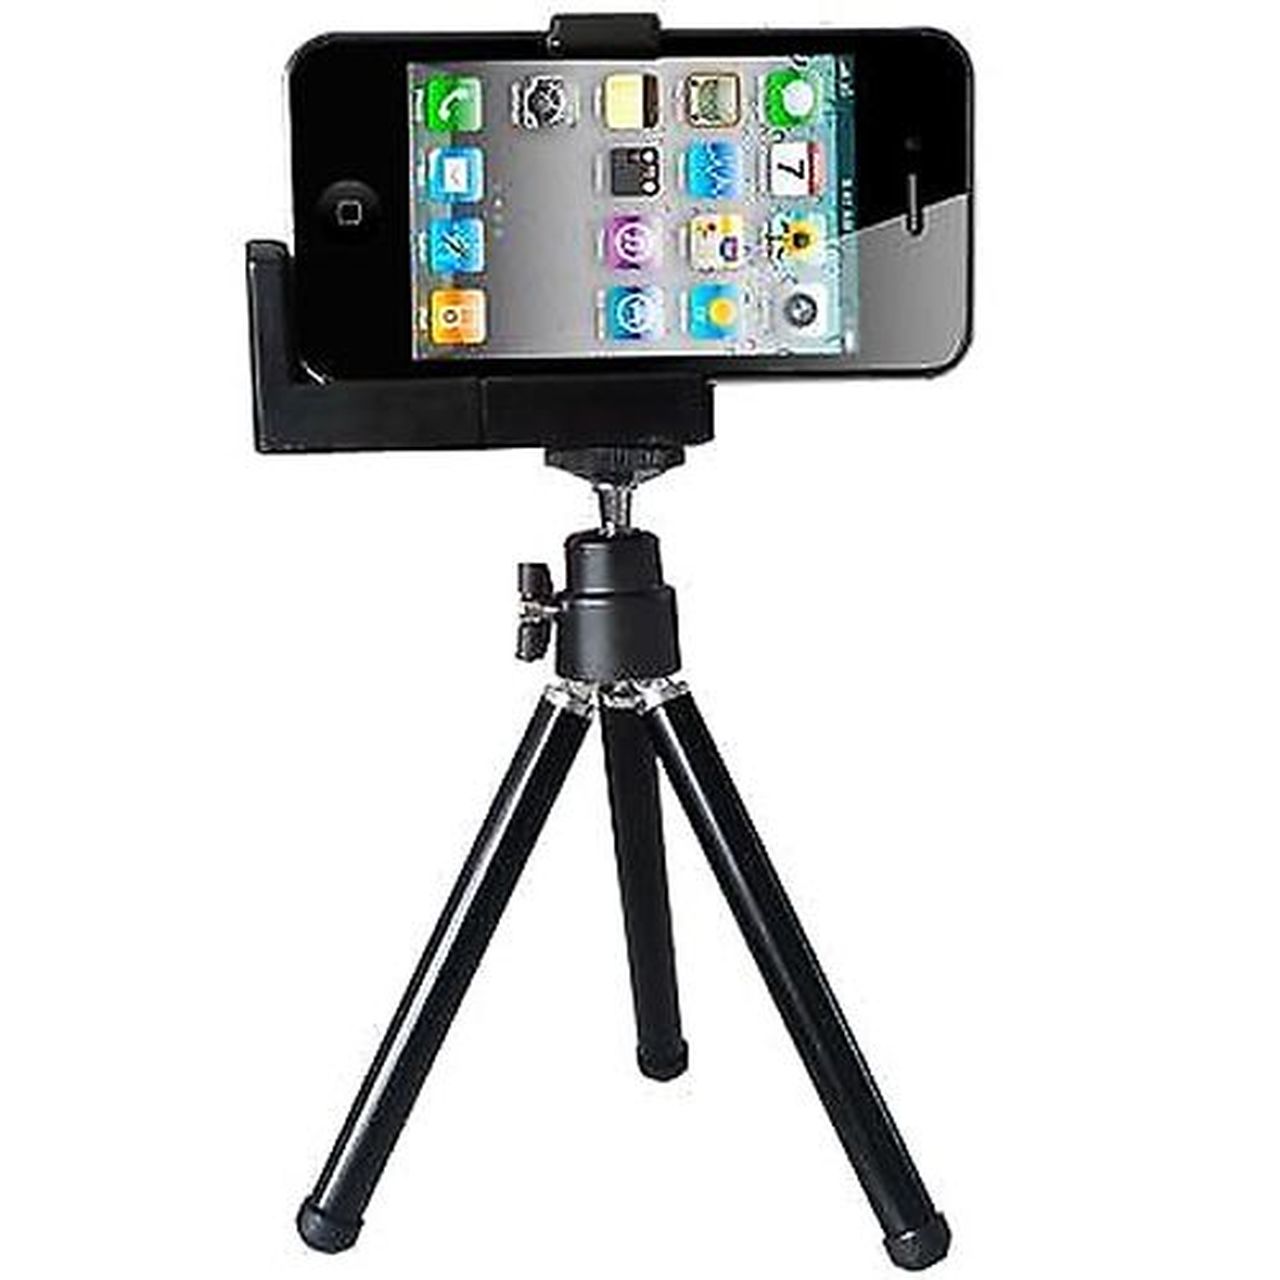 Flexible Octopus Tripod for iPhone 6 & 6 Plus / iPhone 5 & 5S / 5.5-8.0cm Width Mobile Phone